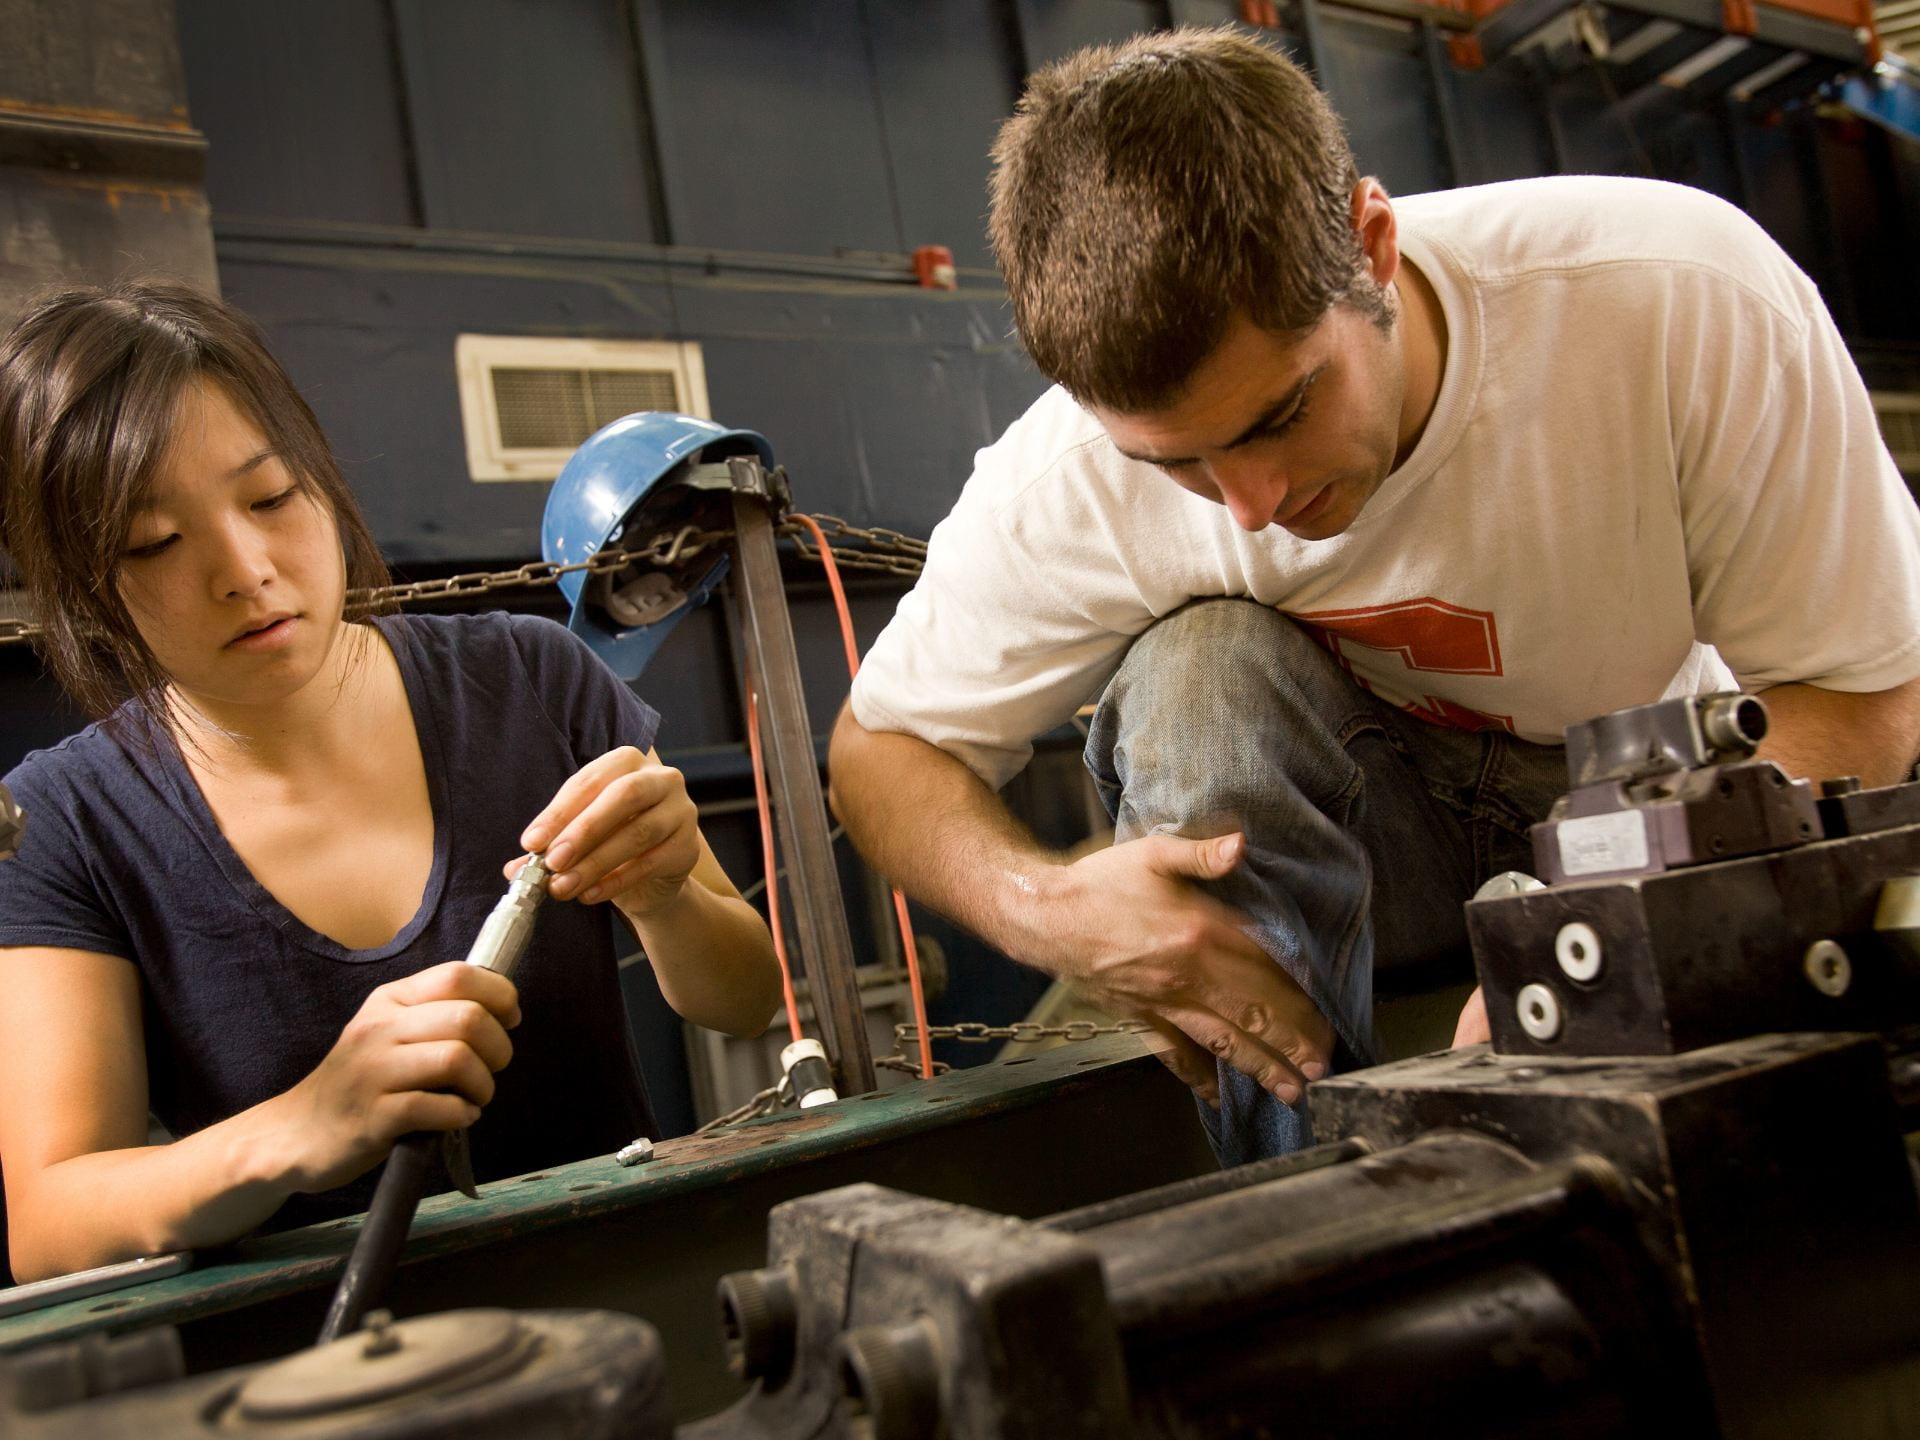 A photograph of two students working on a car engine